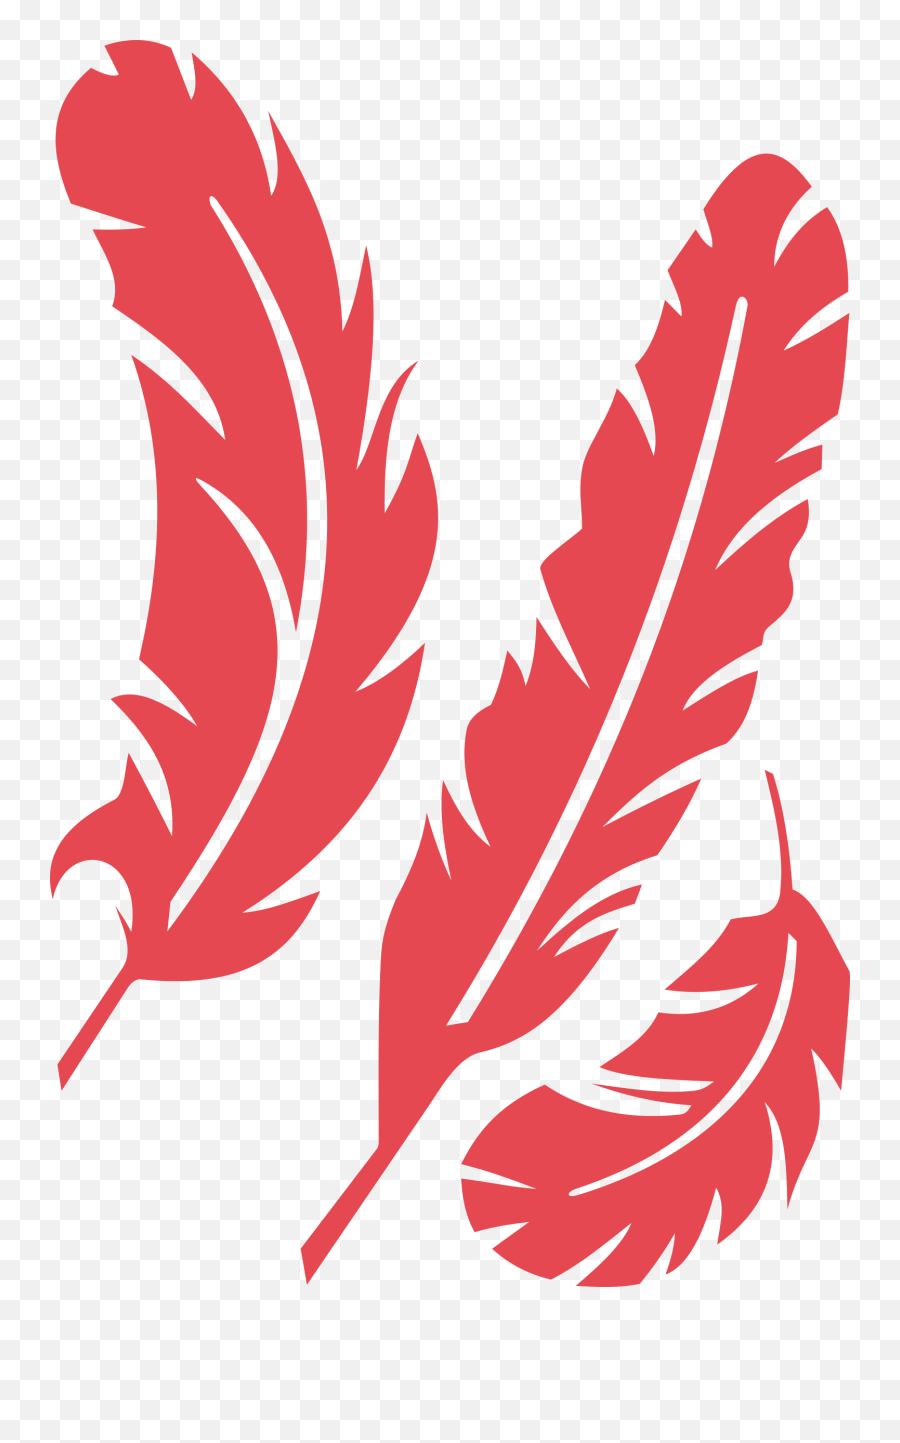 Download Free Png Red Feathers - Dlpngcom Feathers Clipart,Feathers Transparent